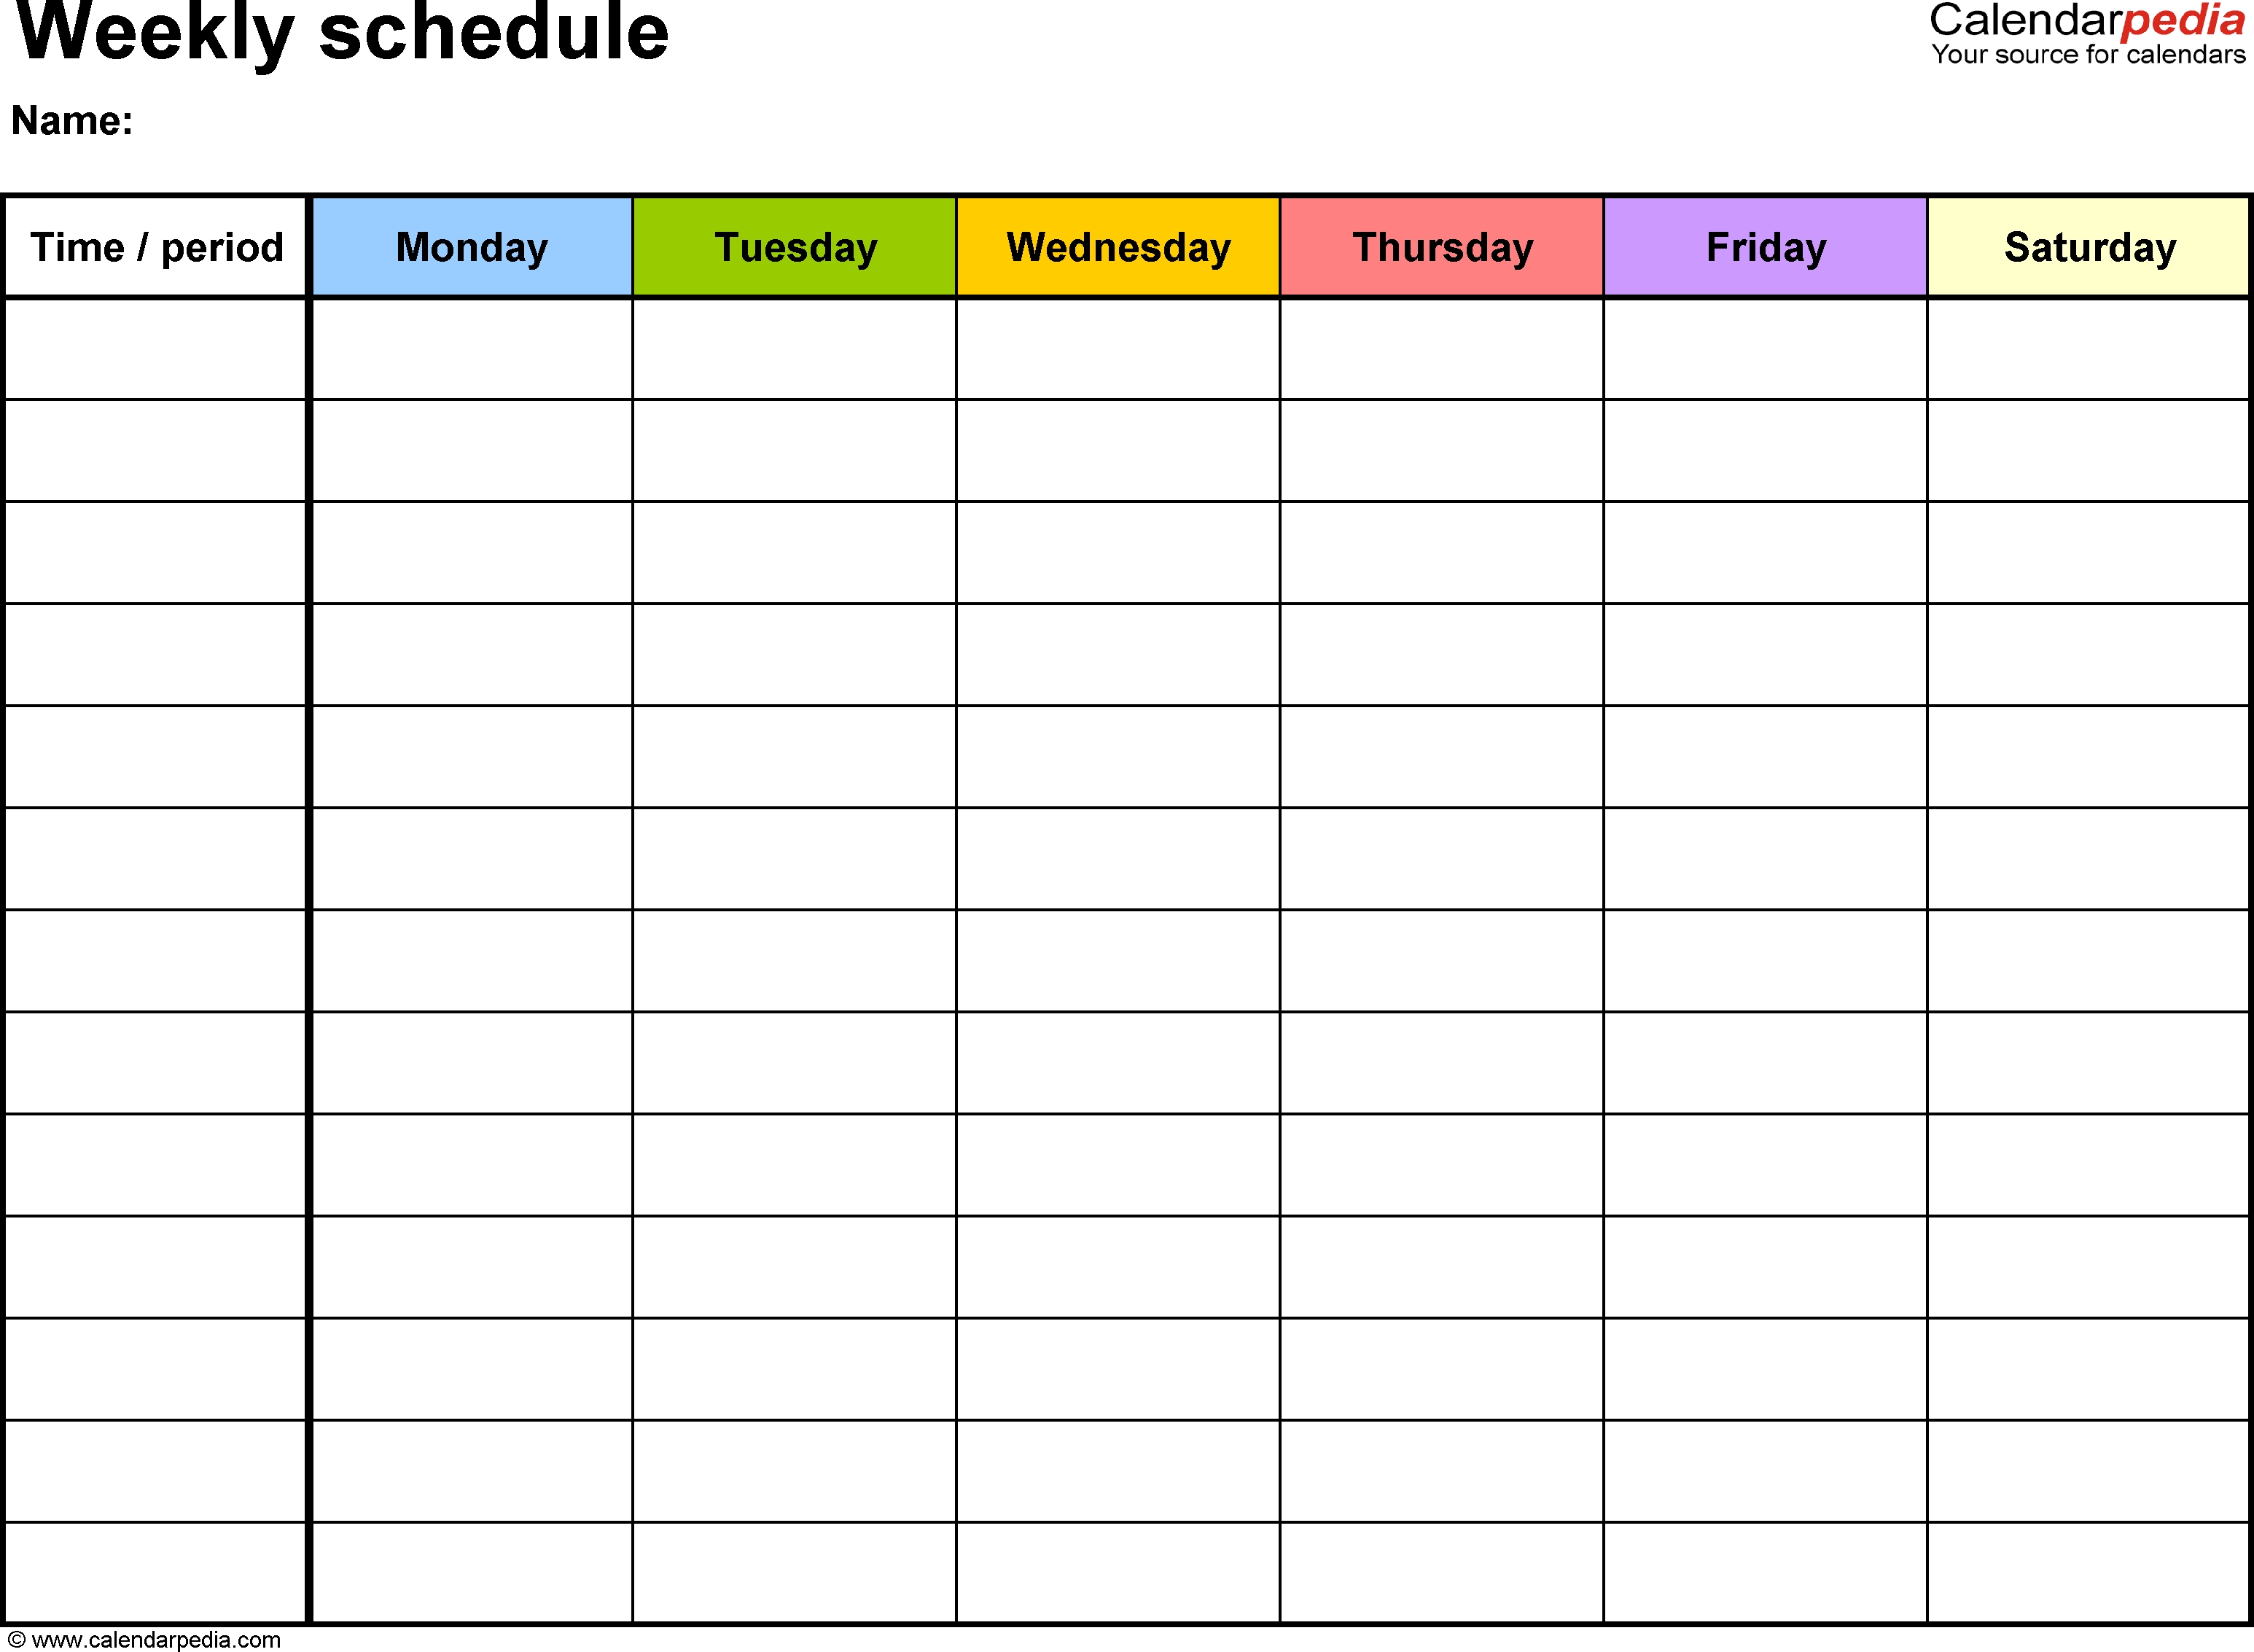 Free Weekly Schedule Templates For Word - 18 Templates Calendar Week Template Word